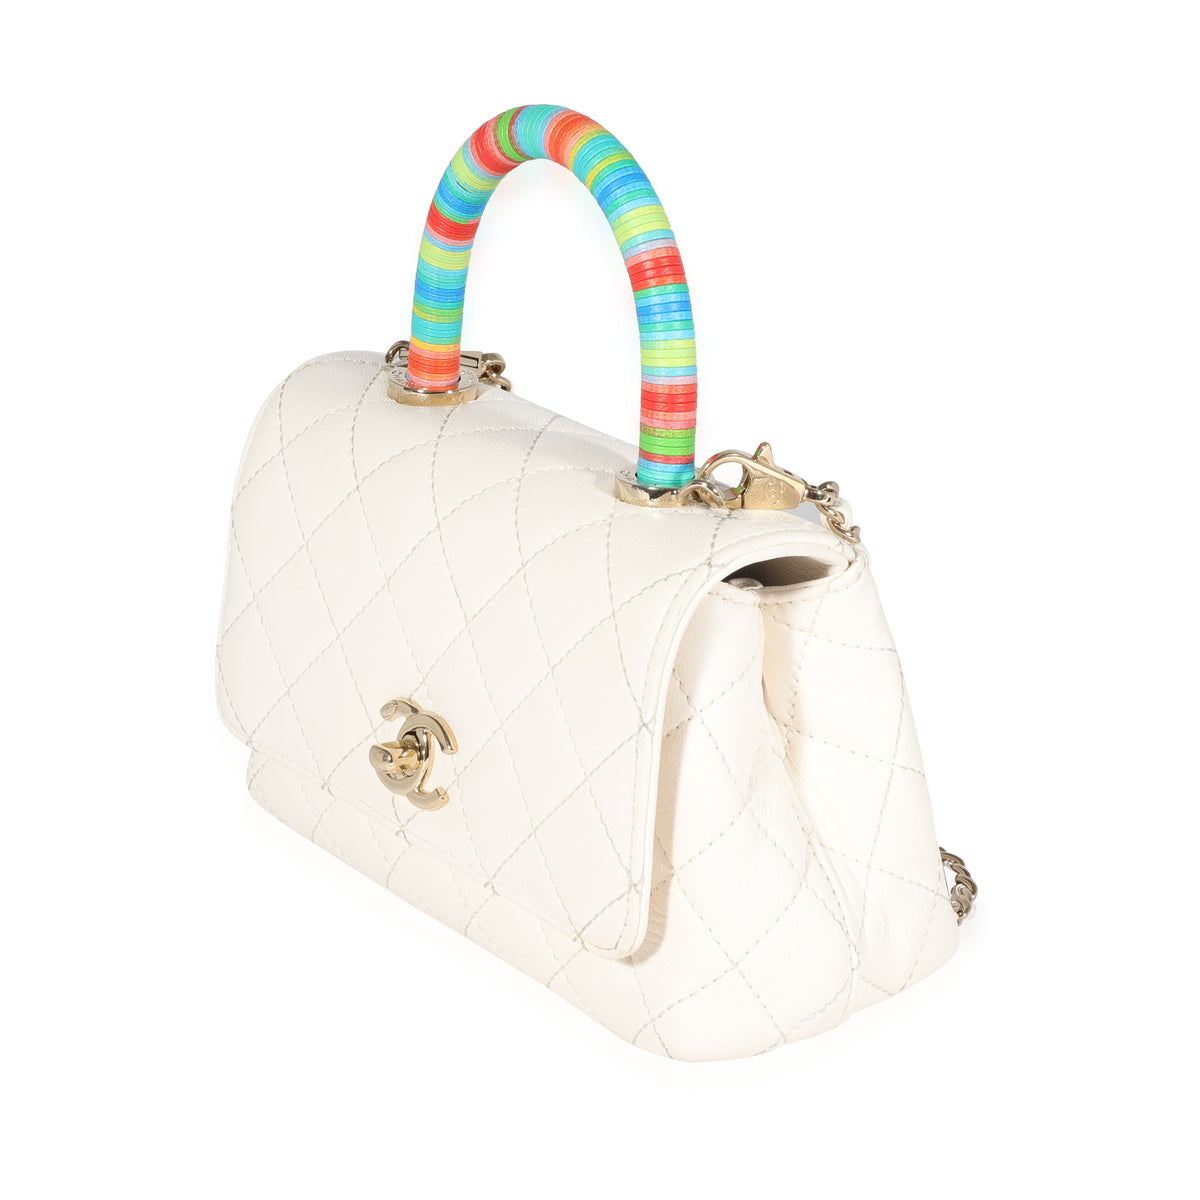 Chanel Coco Handle Medium Chevron Flap Bag in White with GHW